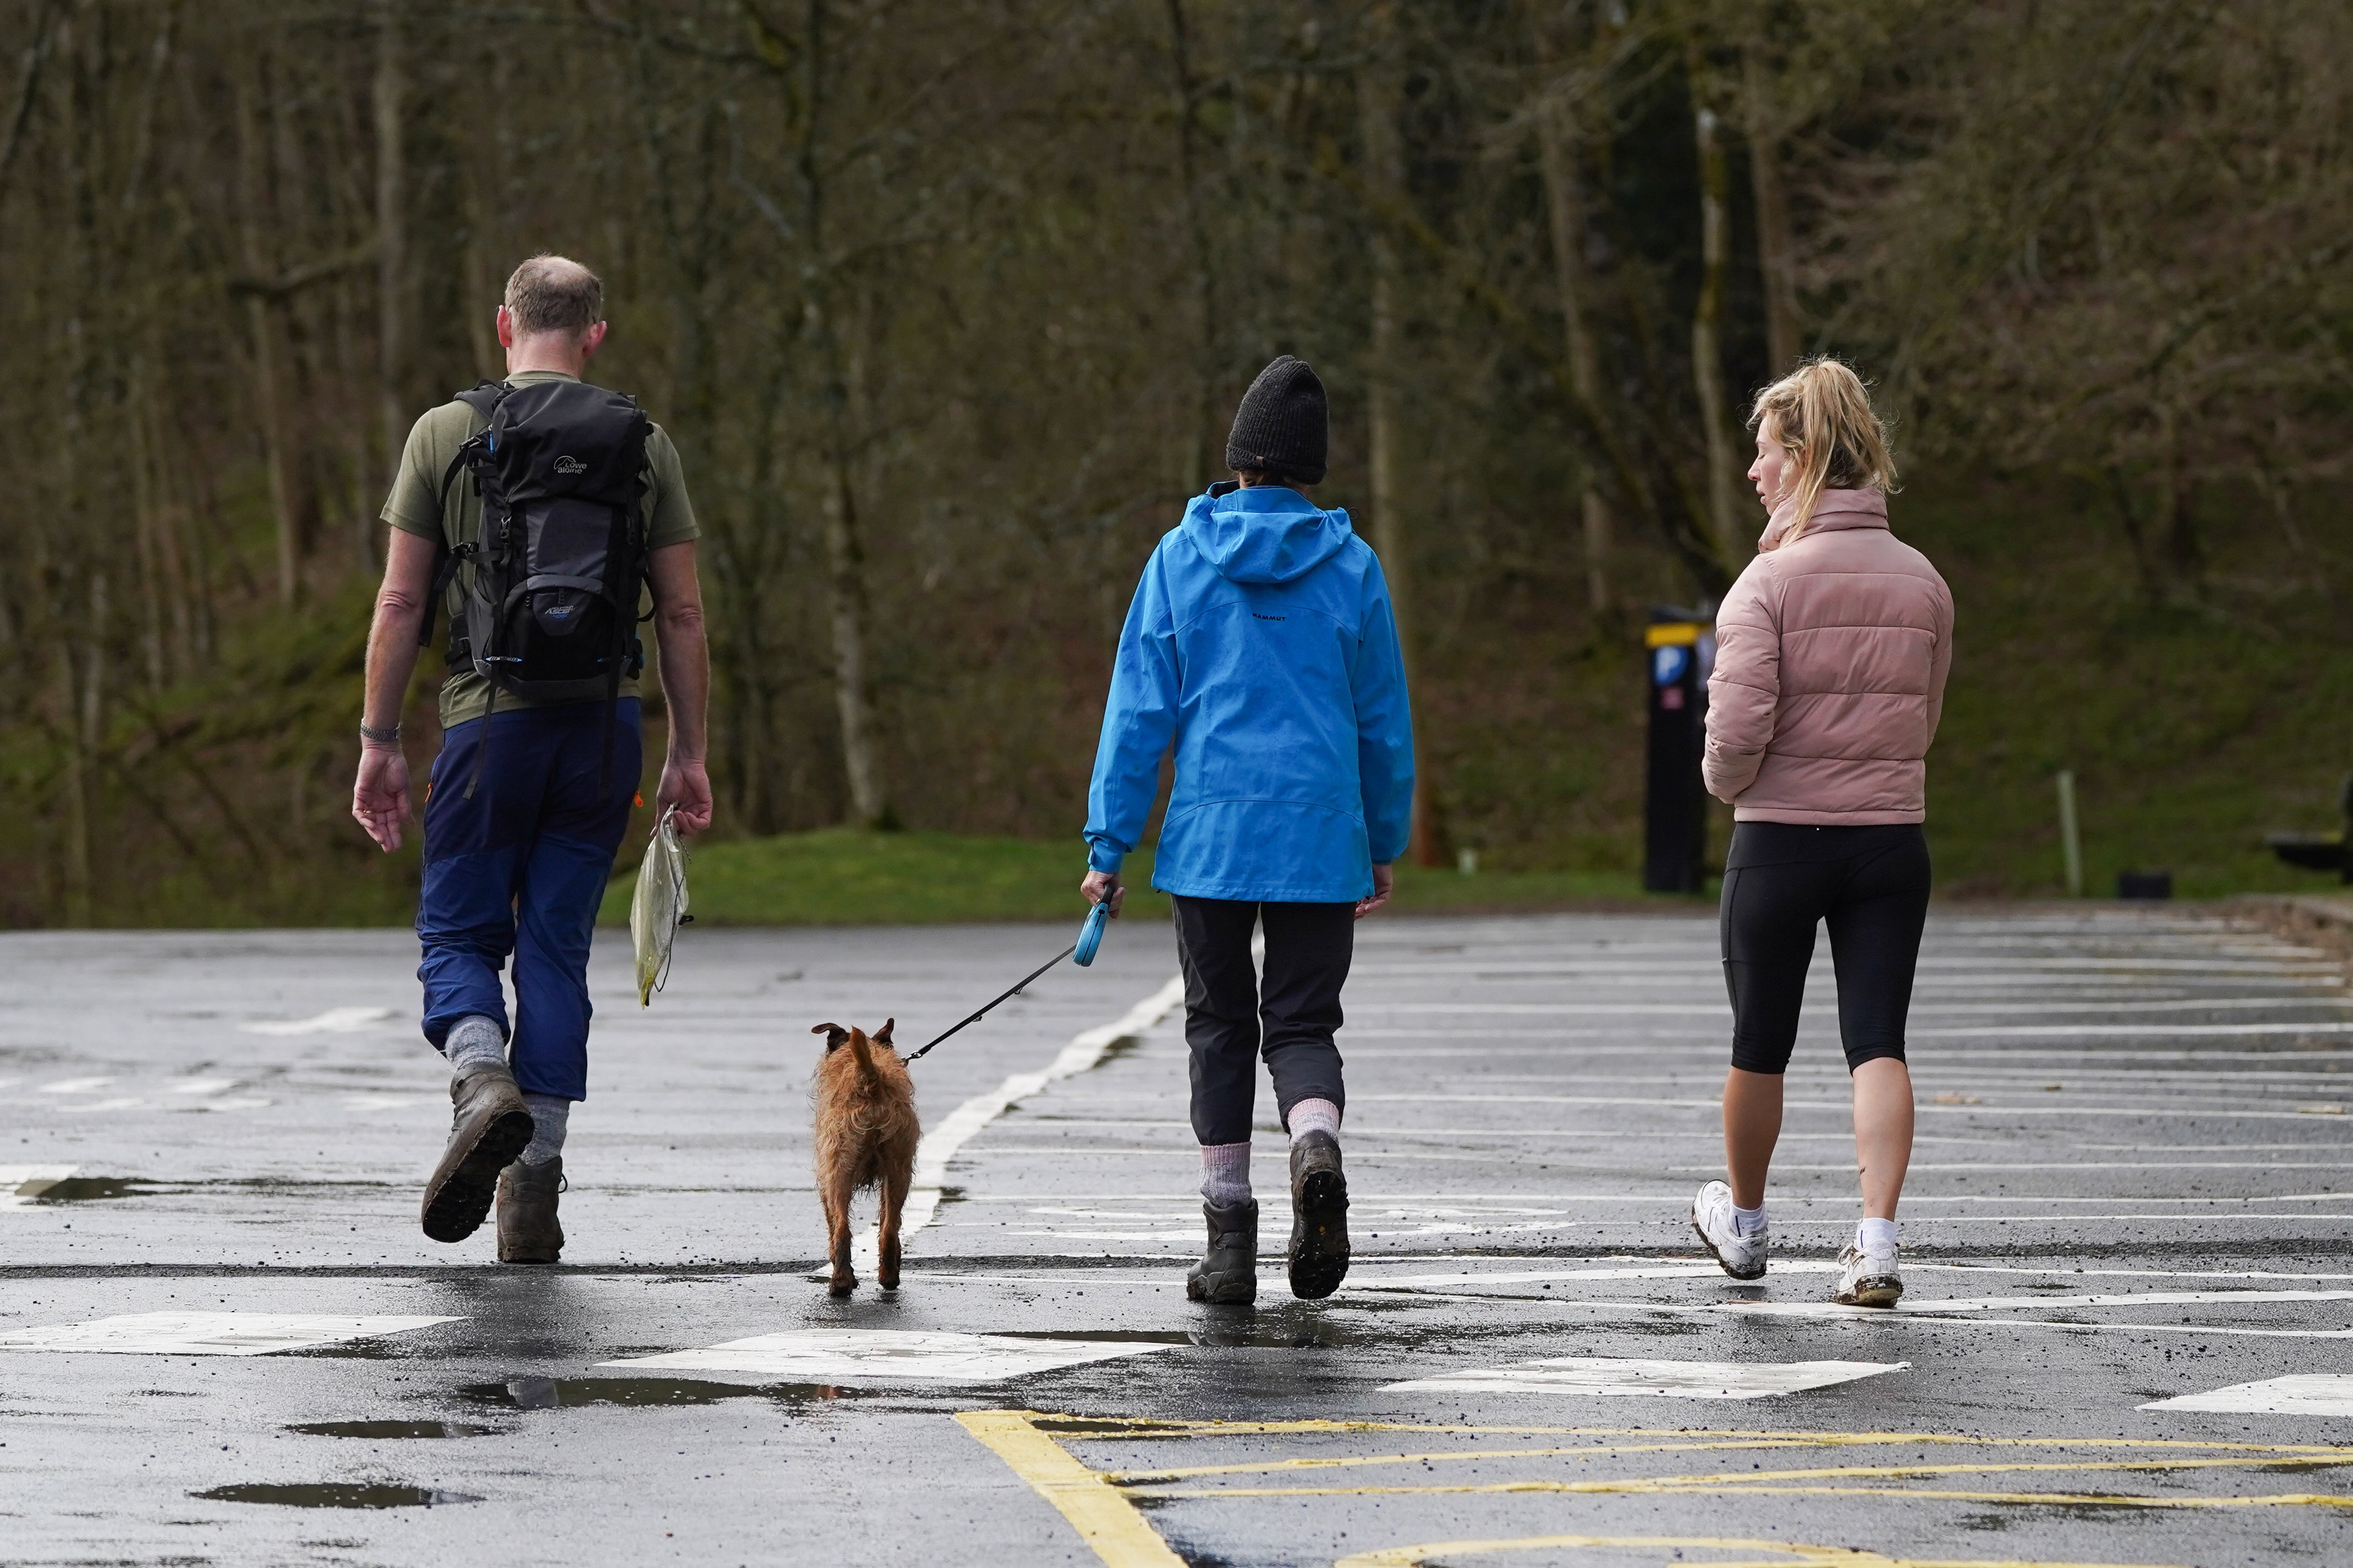 Representative: A local family walk their dog in Yorkshiireon 28 March 2020